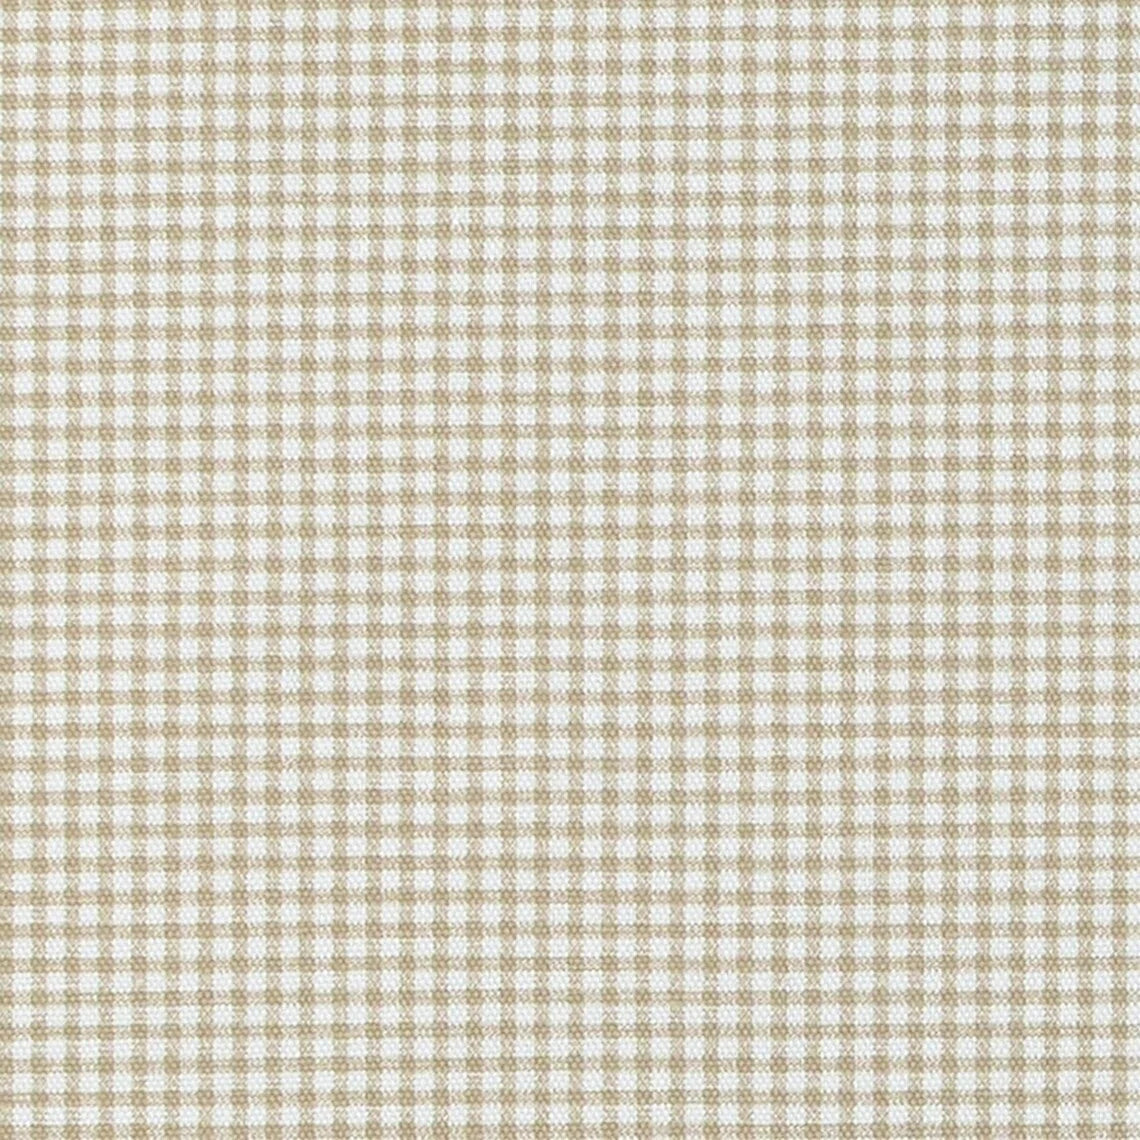 gathered bedskirt in farmhouse beige gingham check on cream